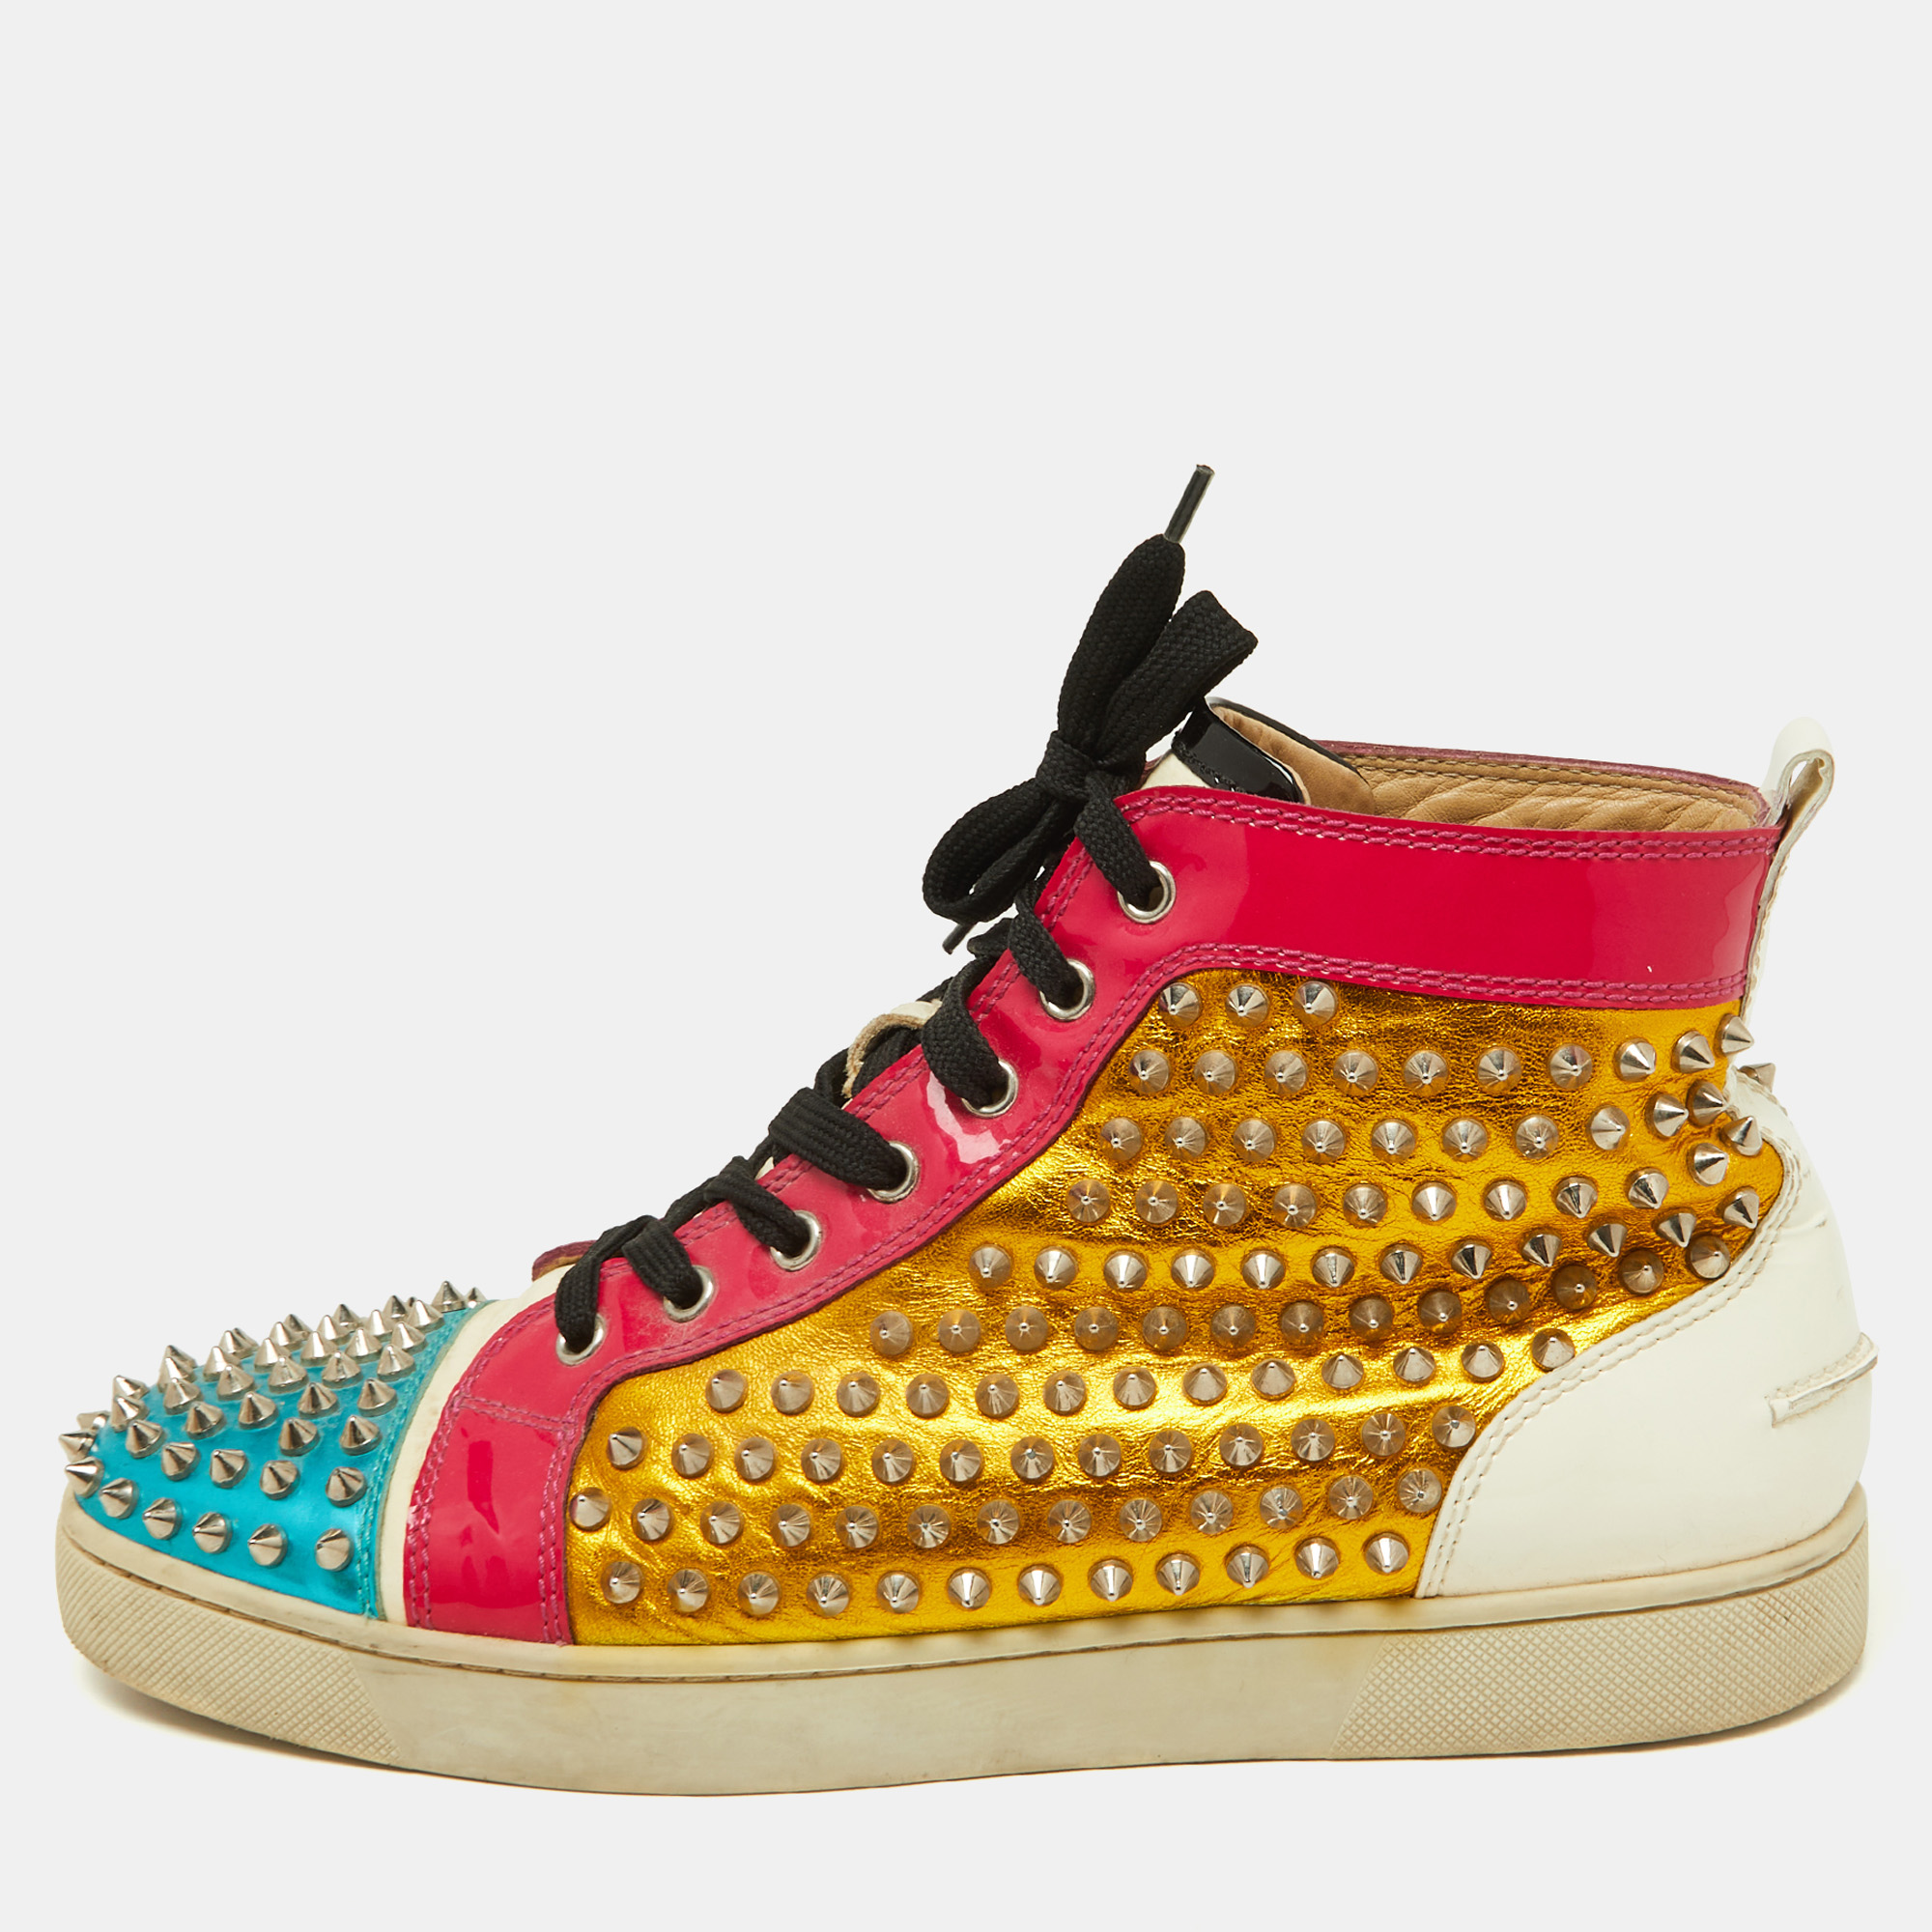 Christian louboutin multicolor metallic leather louis spikes sneakers size 43